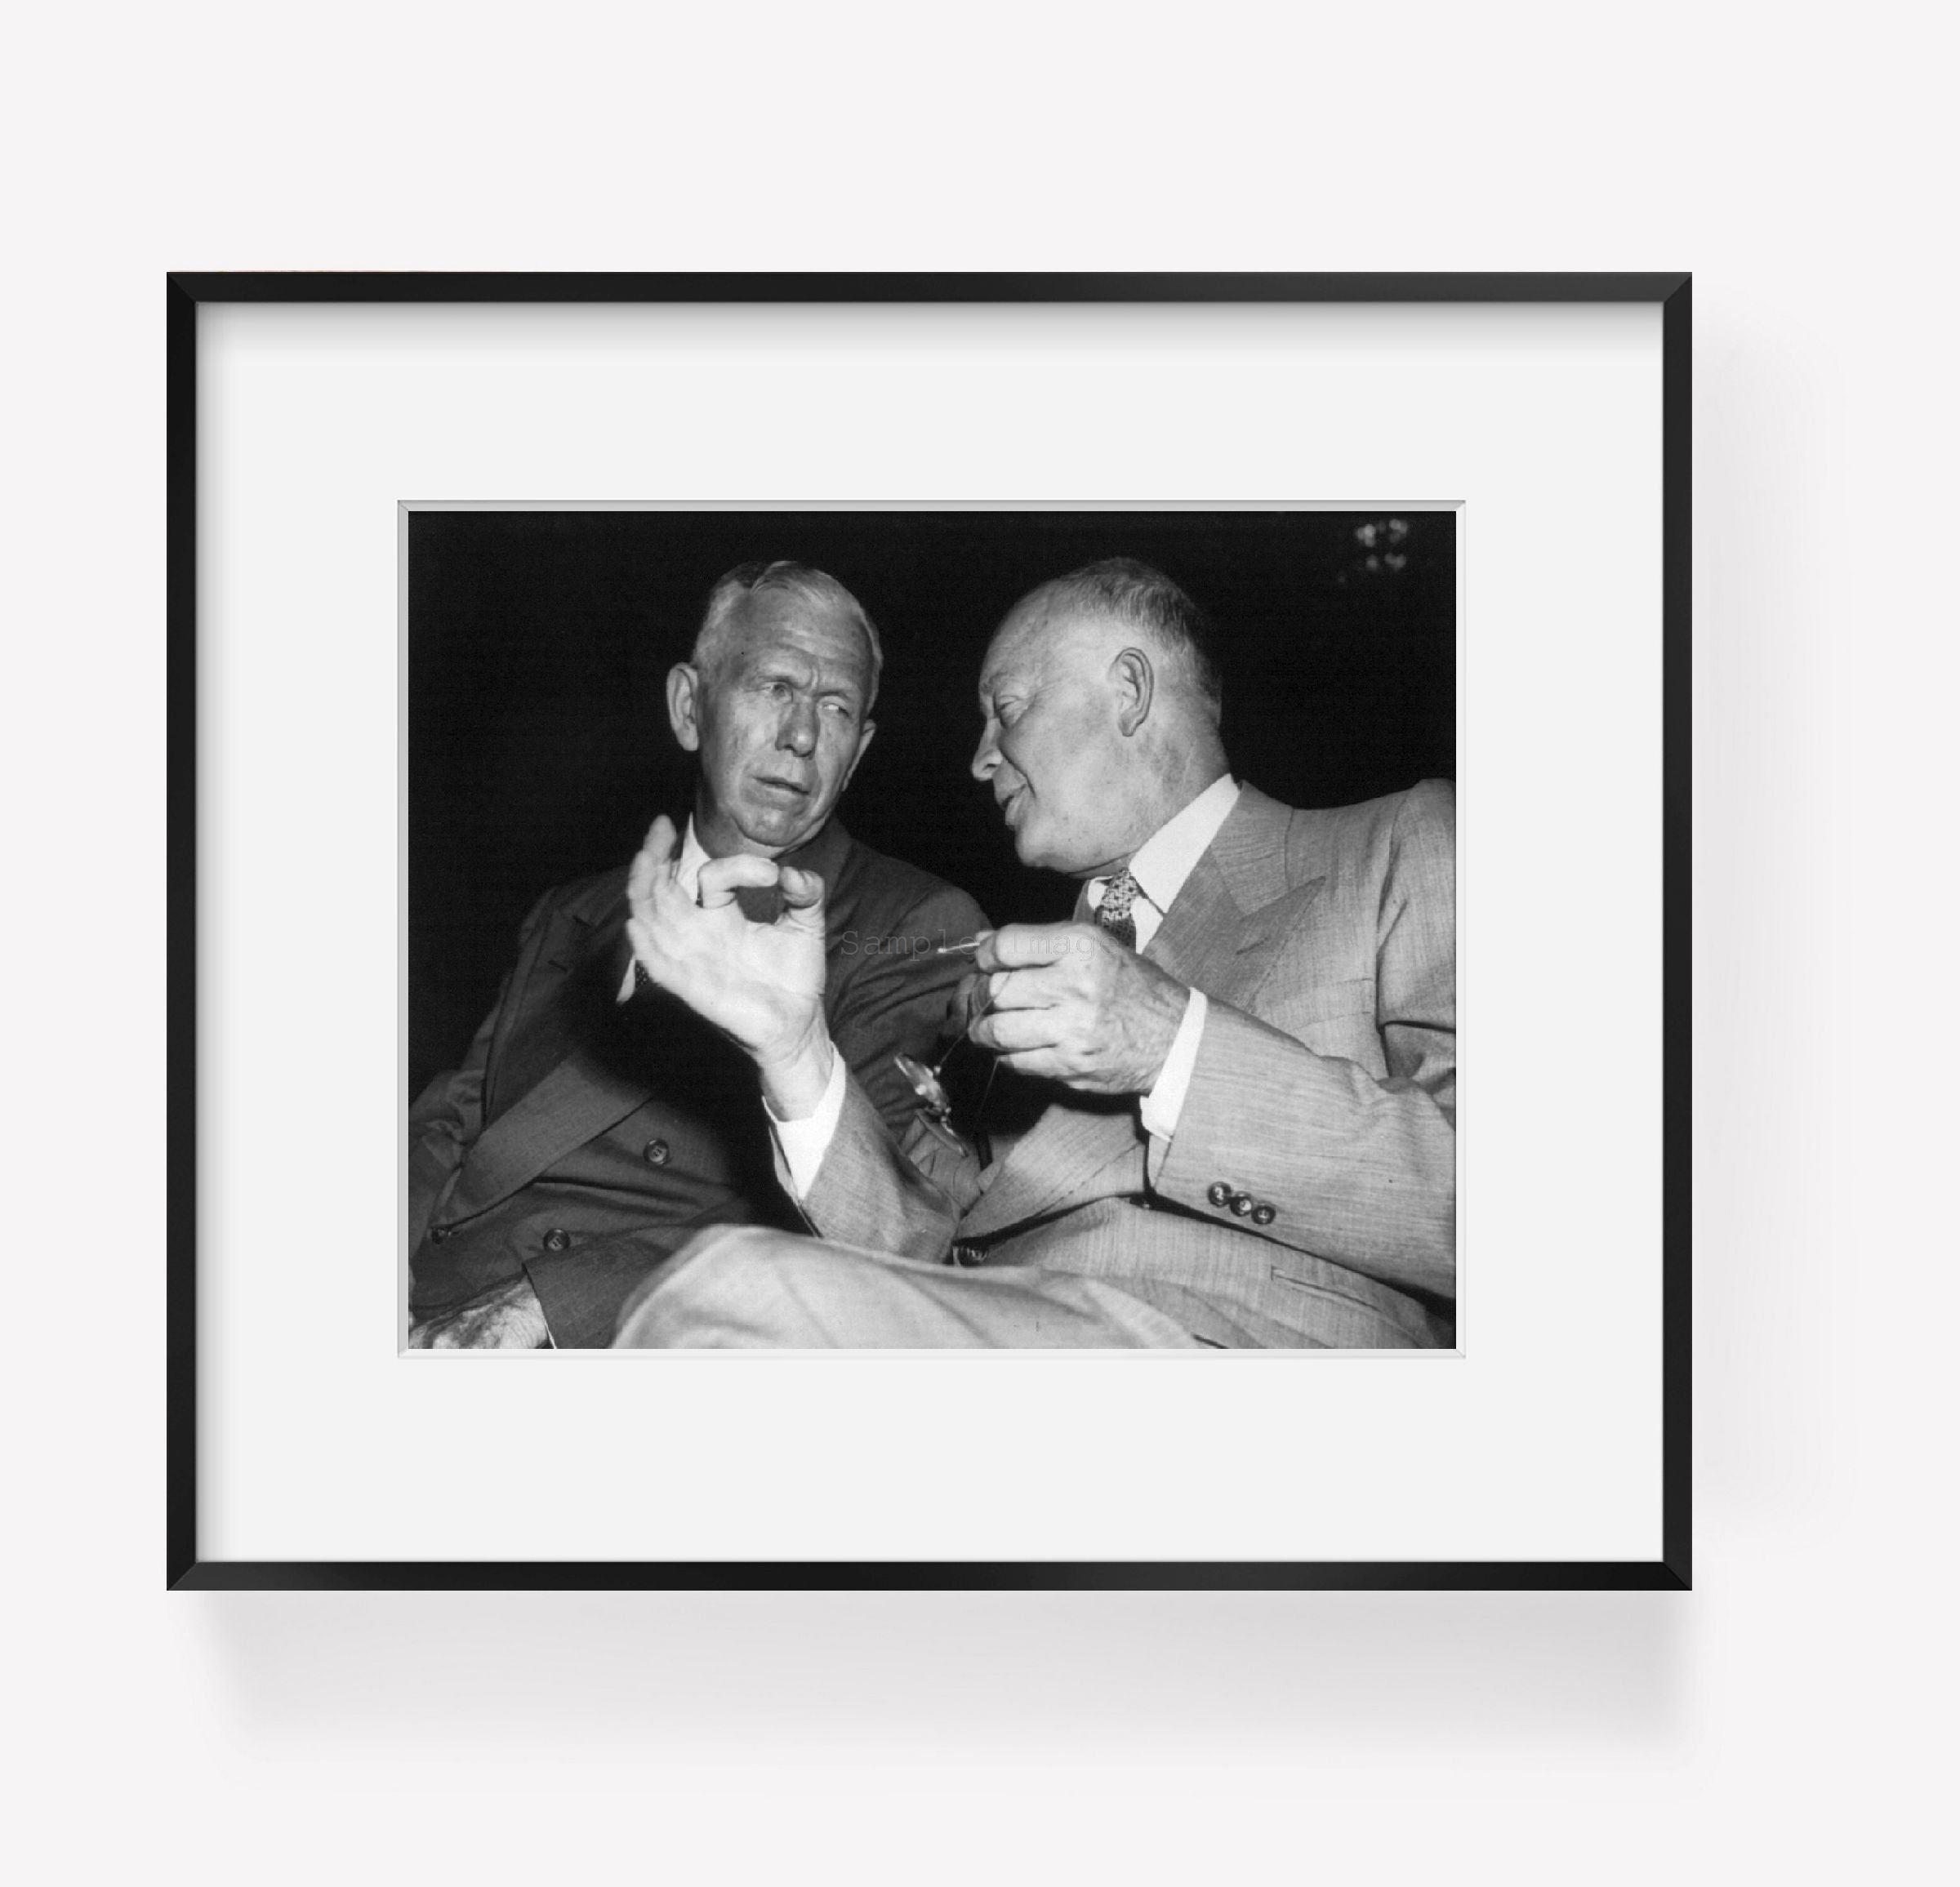 1950 July 5 photograph of Dwight D. Eisenhower with Gen. George C. Marshall at t